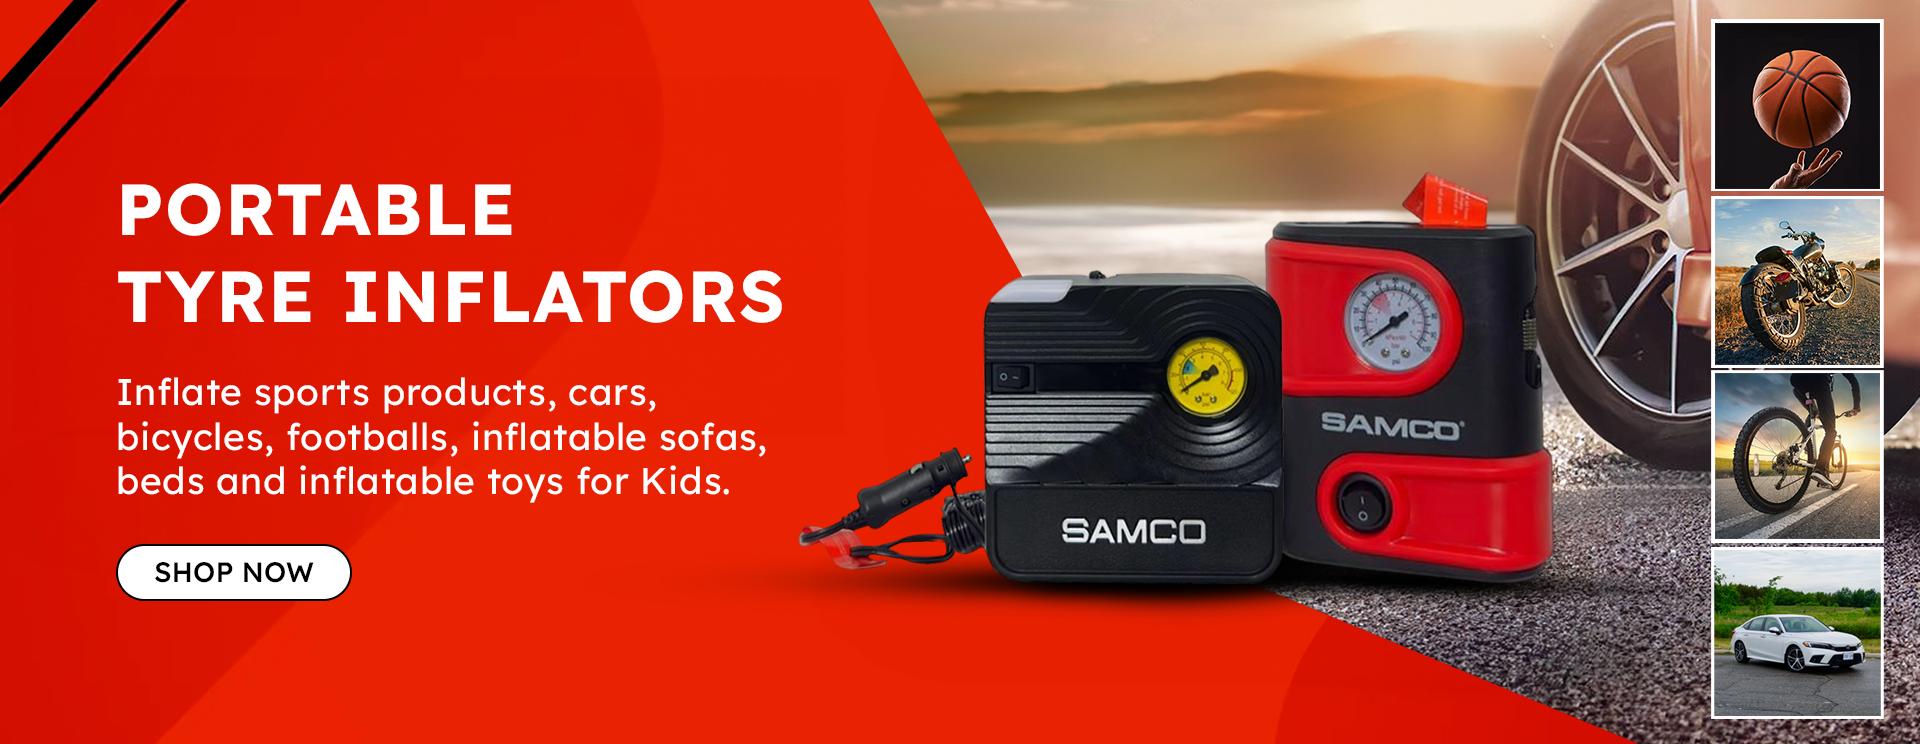 Tyre_inflator_banner_4_1